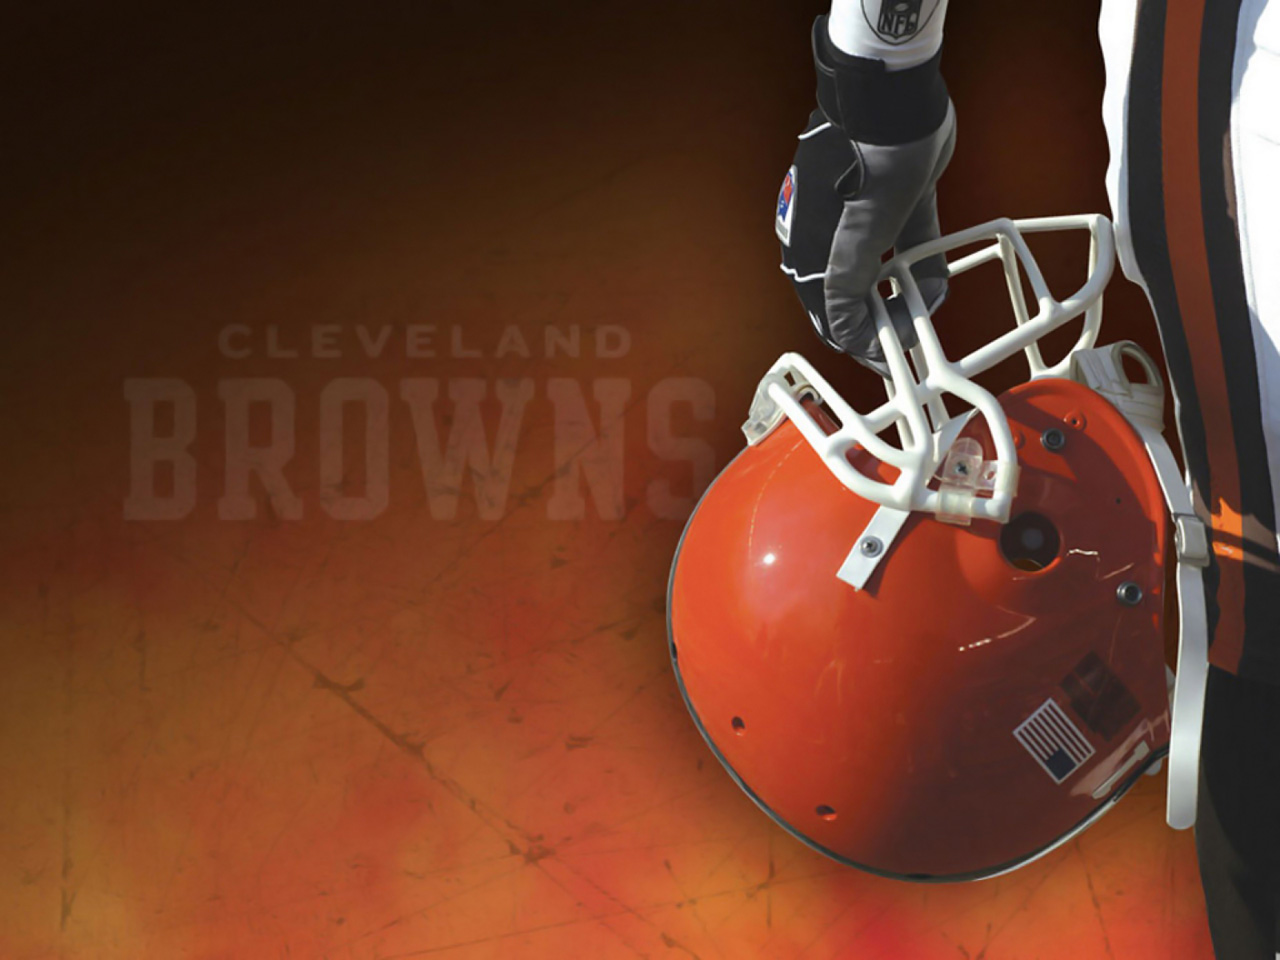 Cleveland Browns Wallpaper Collection Images FemaleCelebrity 1280x960